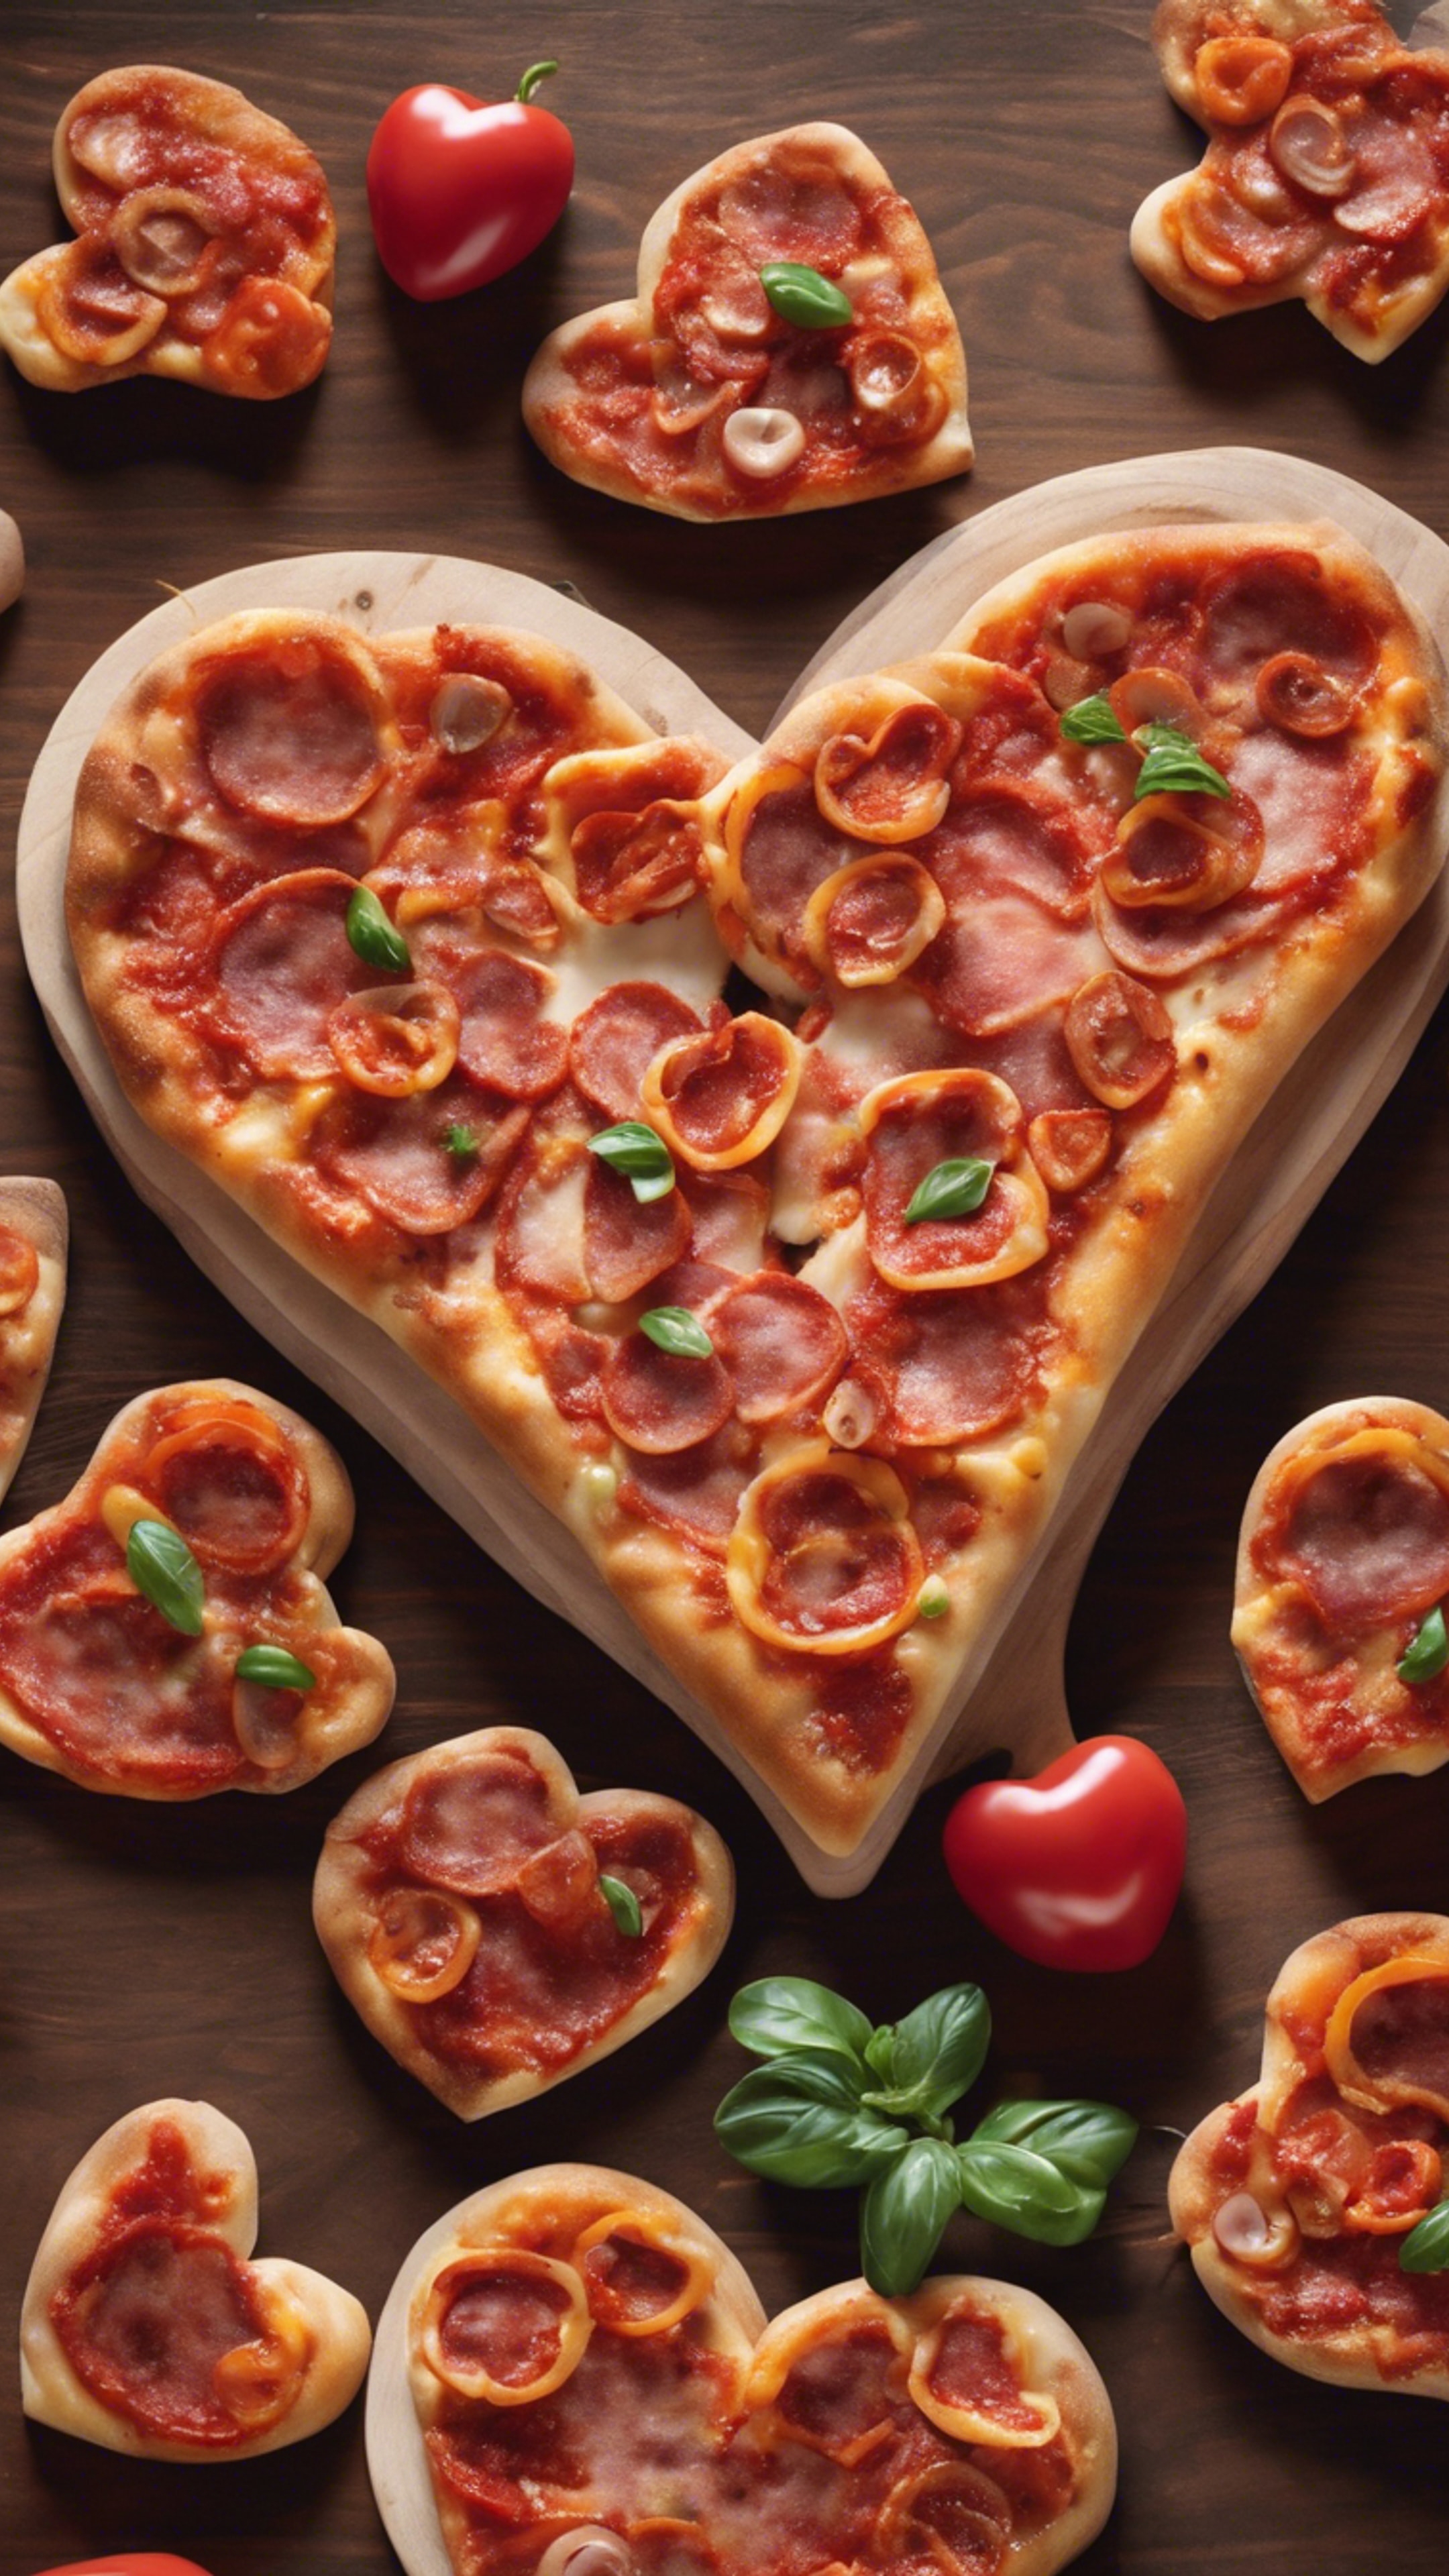 A heart-shaped pizza topped with pepperonis arranged in a smaller heart shape, the perfect cuisine for a romantic date.壁紙[15df62b77c2f46a18143]